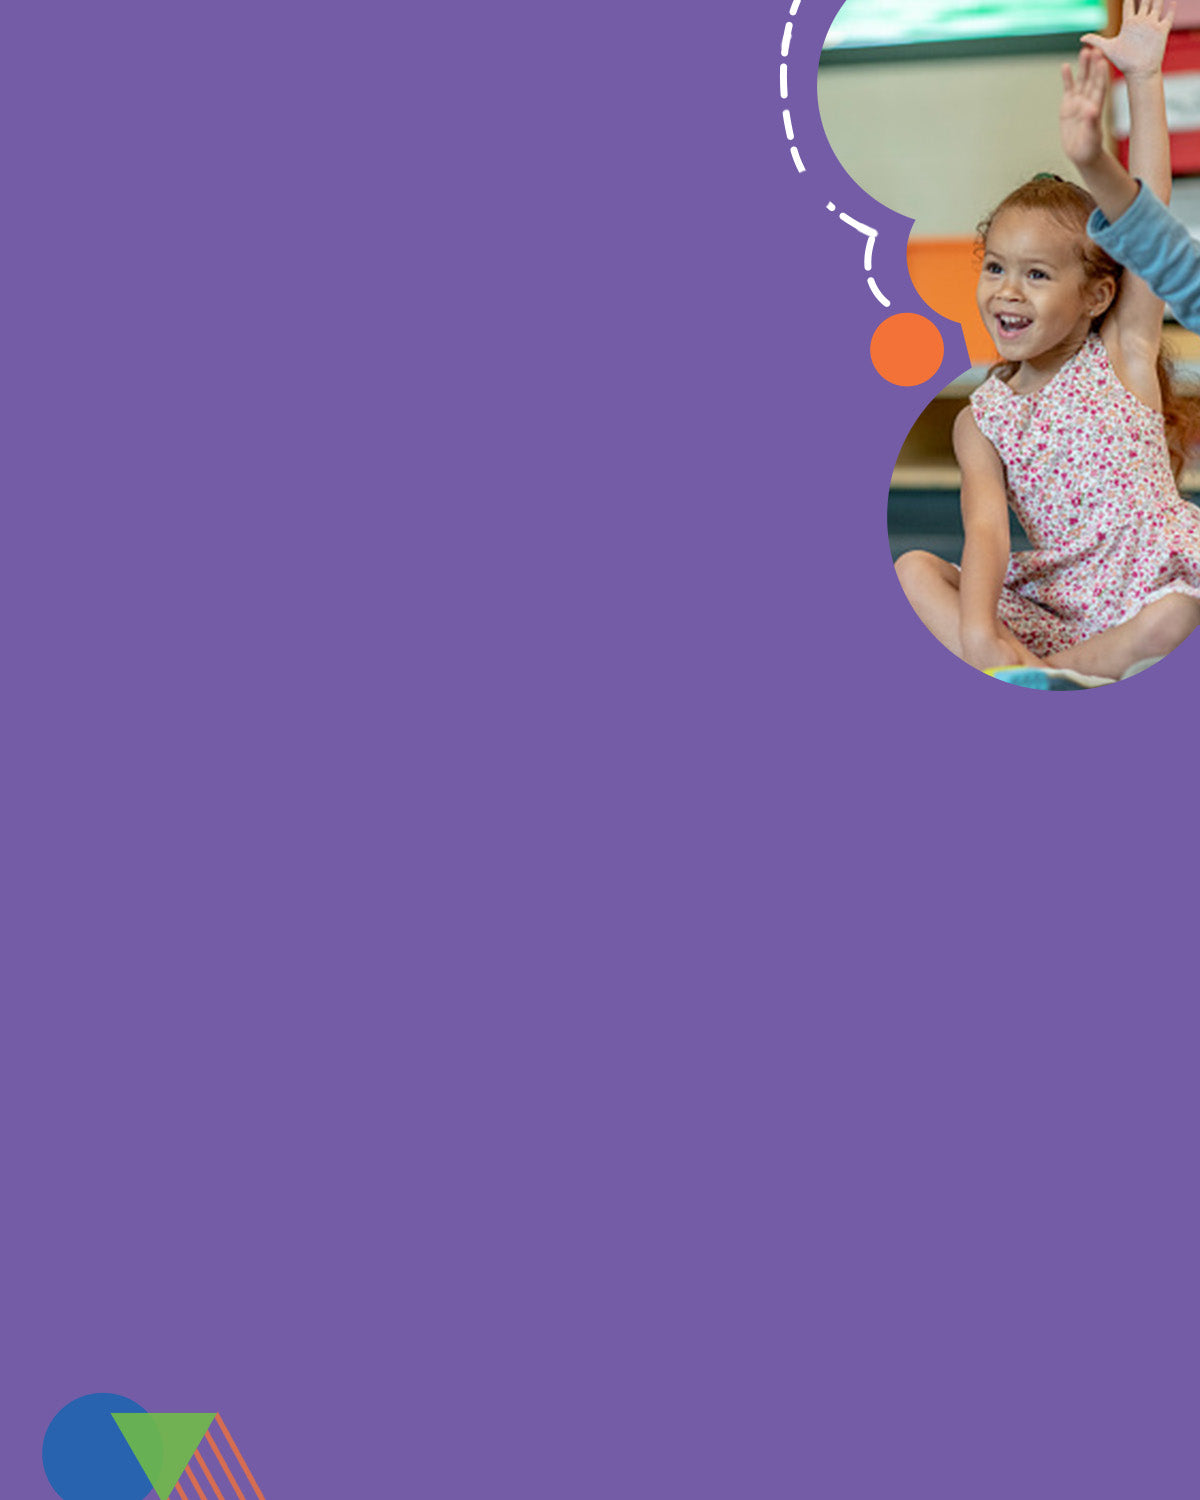 A joyful young girl at school smiling and raising her hand against a purple background with playful geometric shapes, embodying the essence of play based learning.